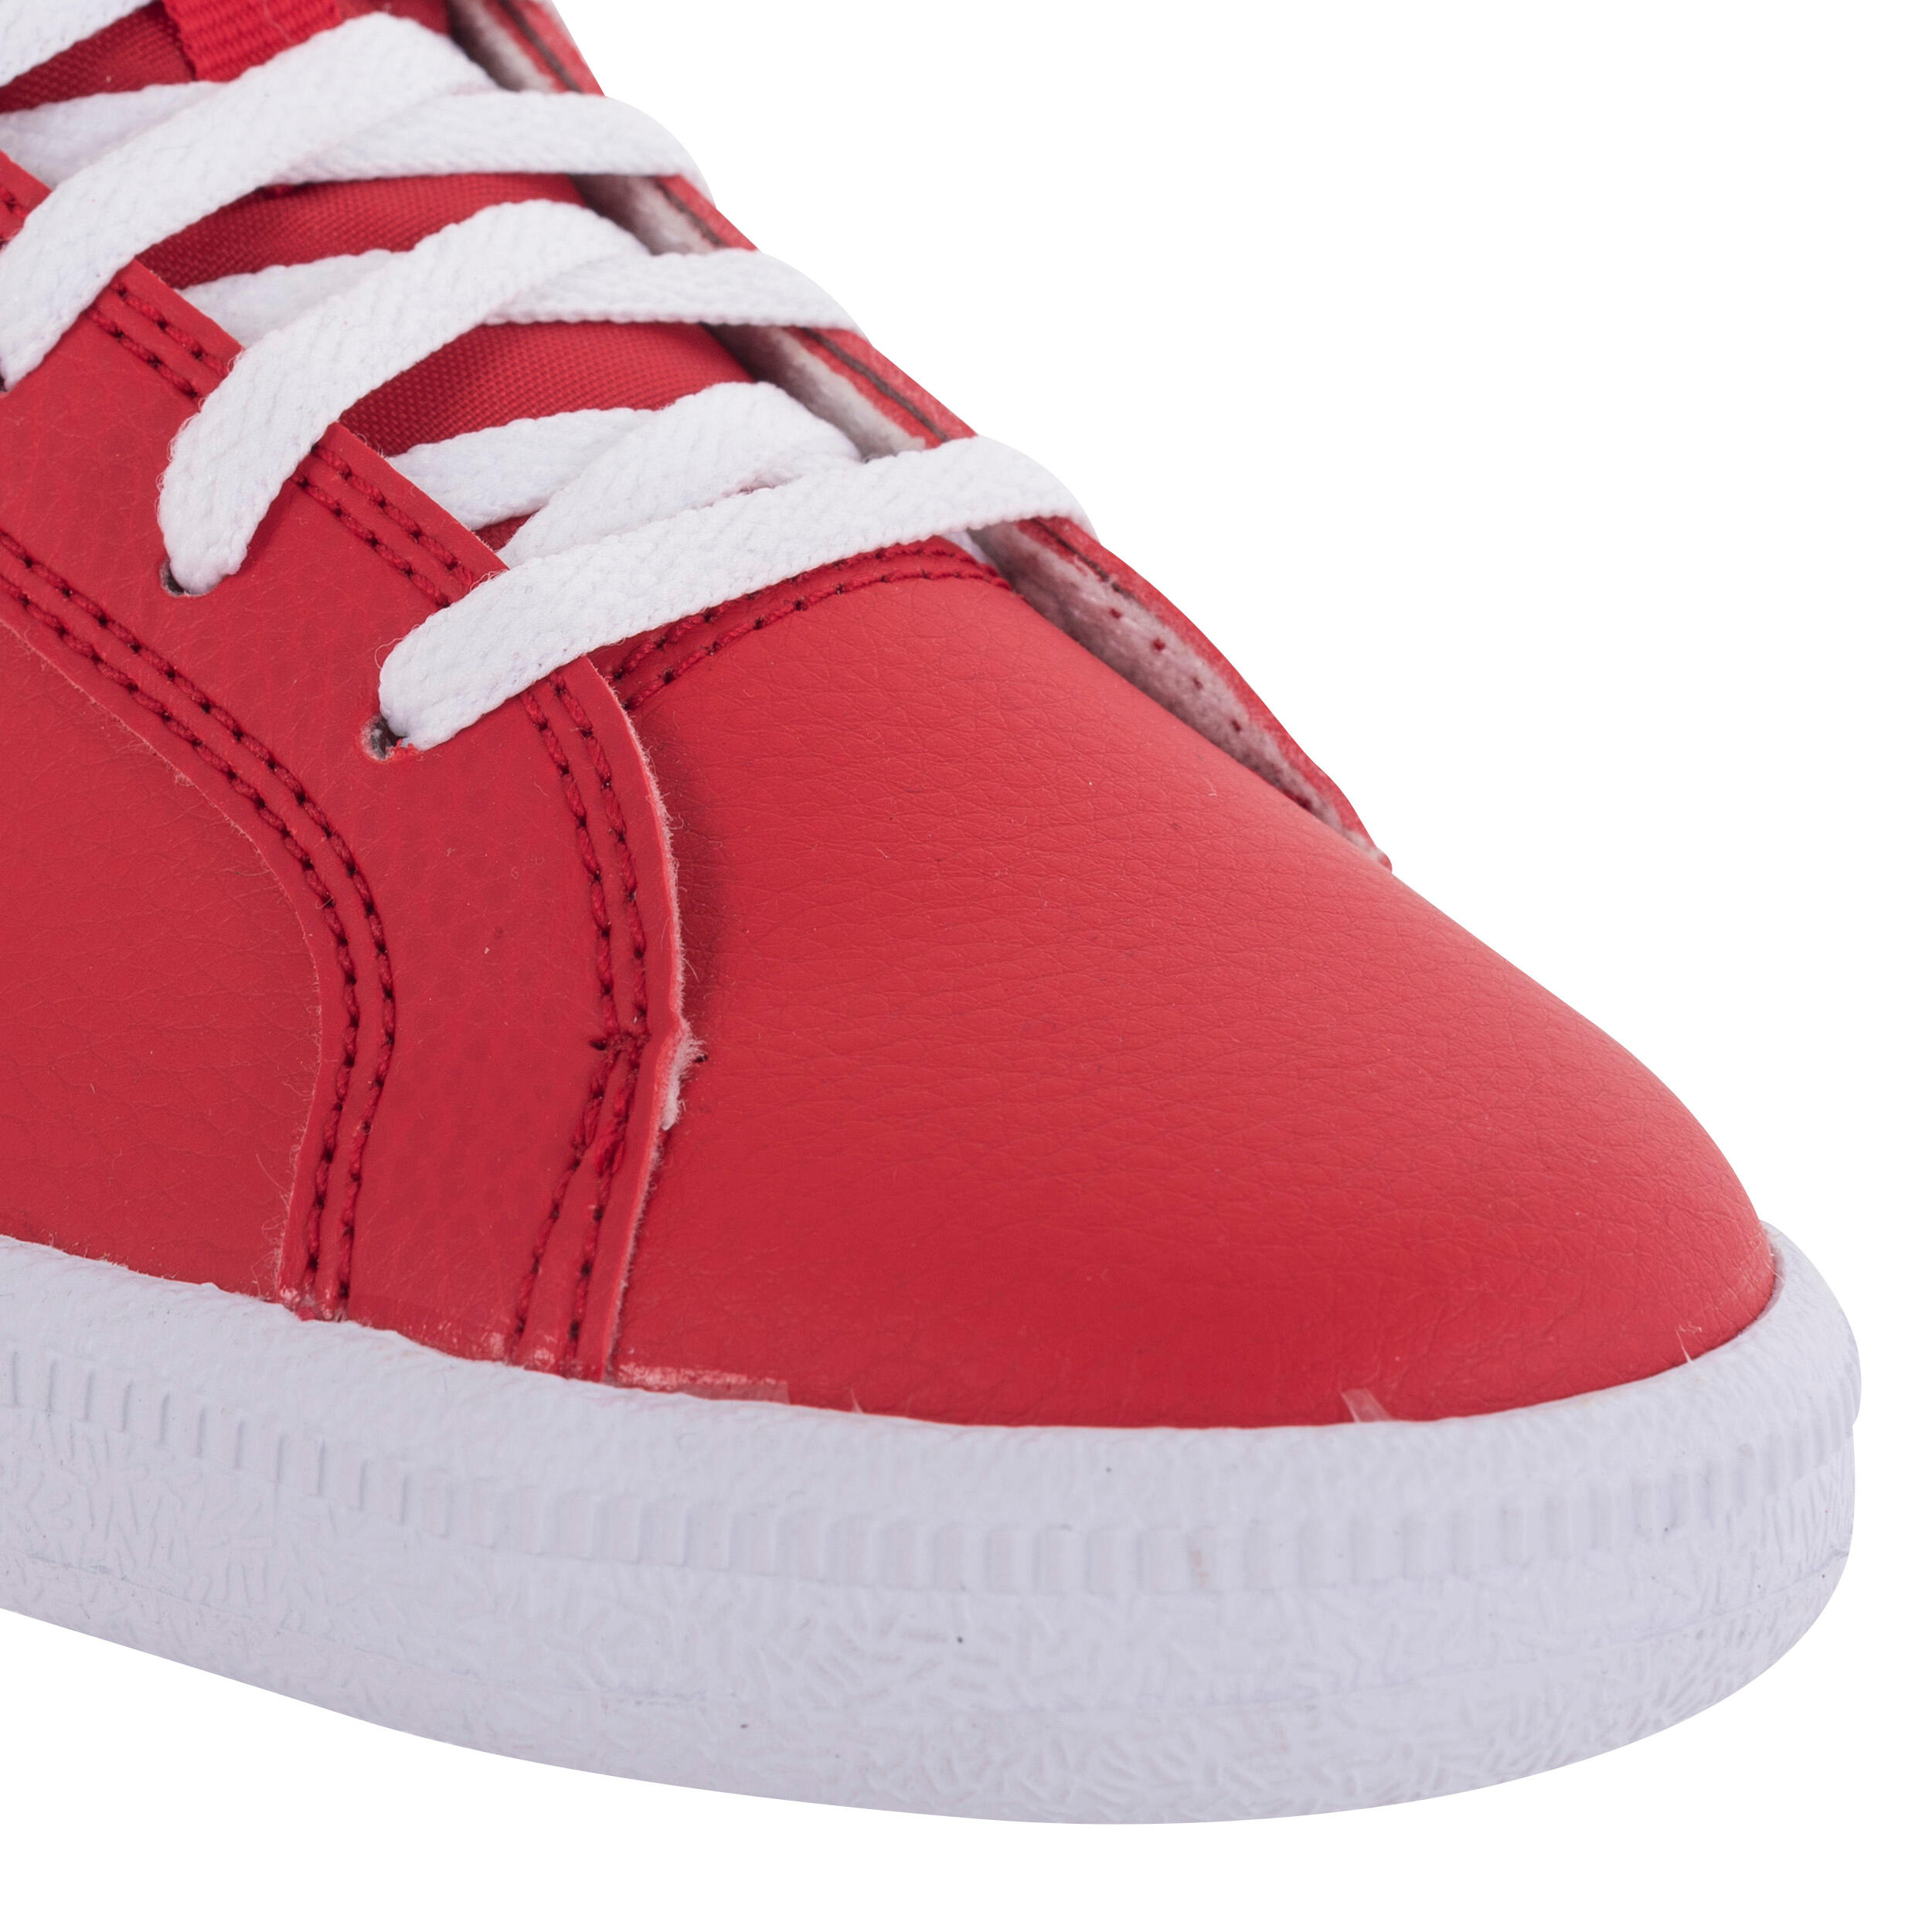 Court Royale Junior Tennis Shoes - Red 9/9